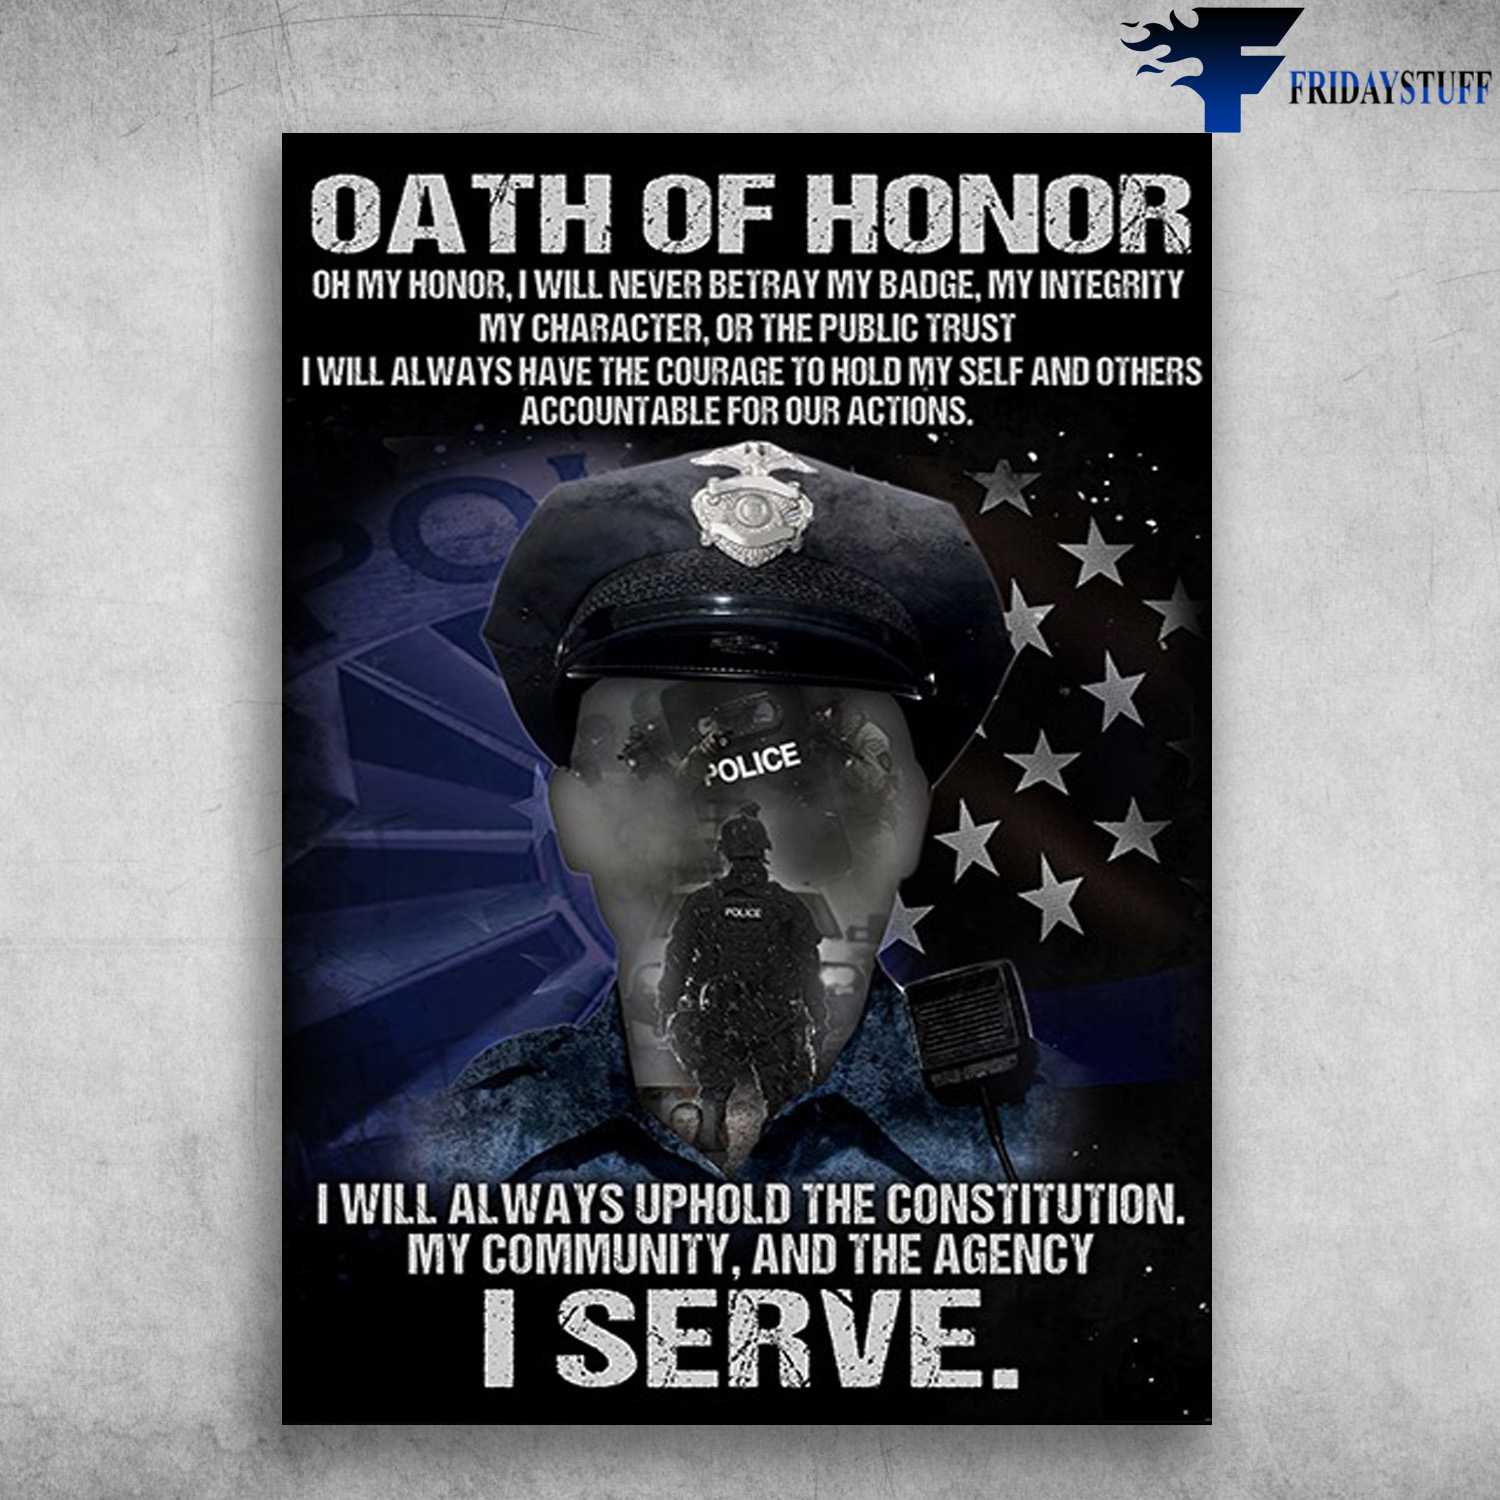 Police Poster - Oath Of Honor, Oh My Honor, I Will Never Betray My Badge, My Intergrity, My Character, Of The Public Trust, I Will Allways Uphold The Constitution, I Serve